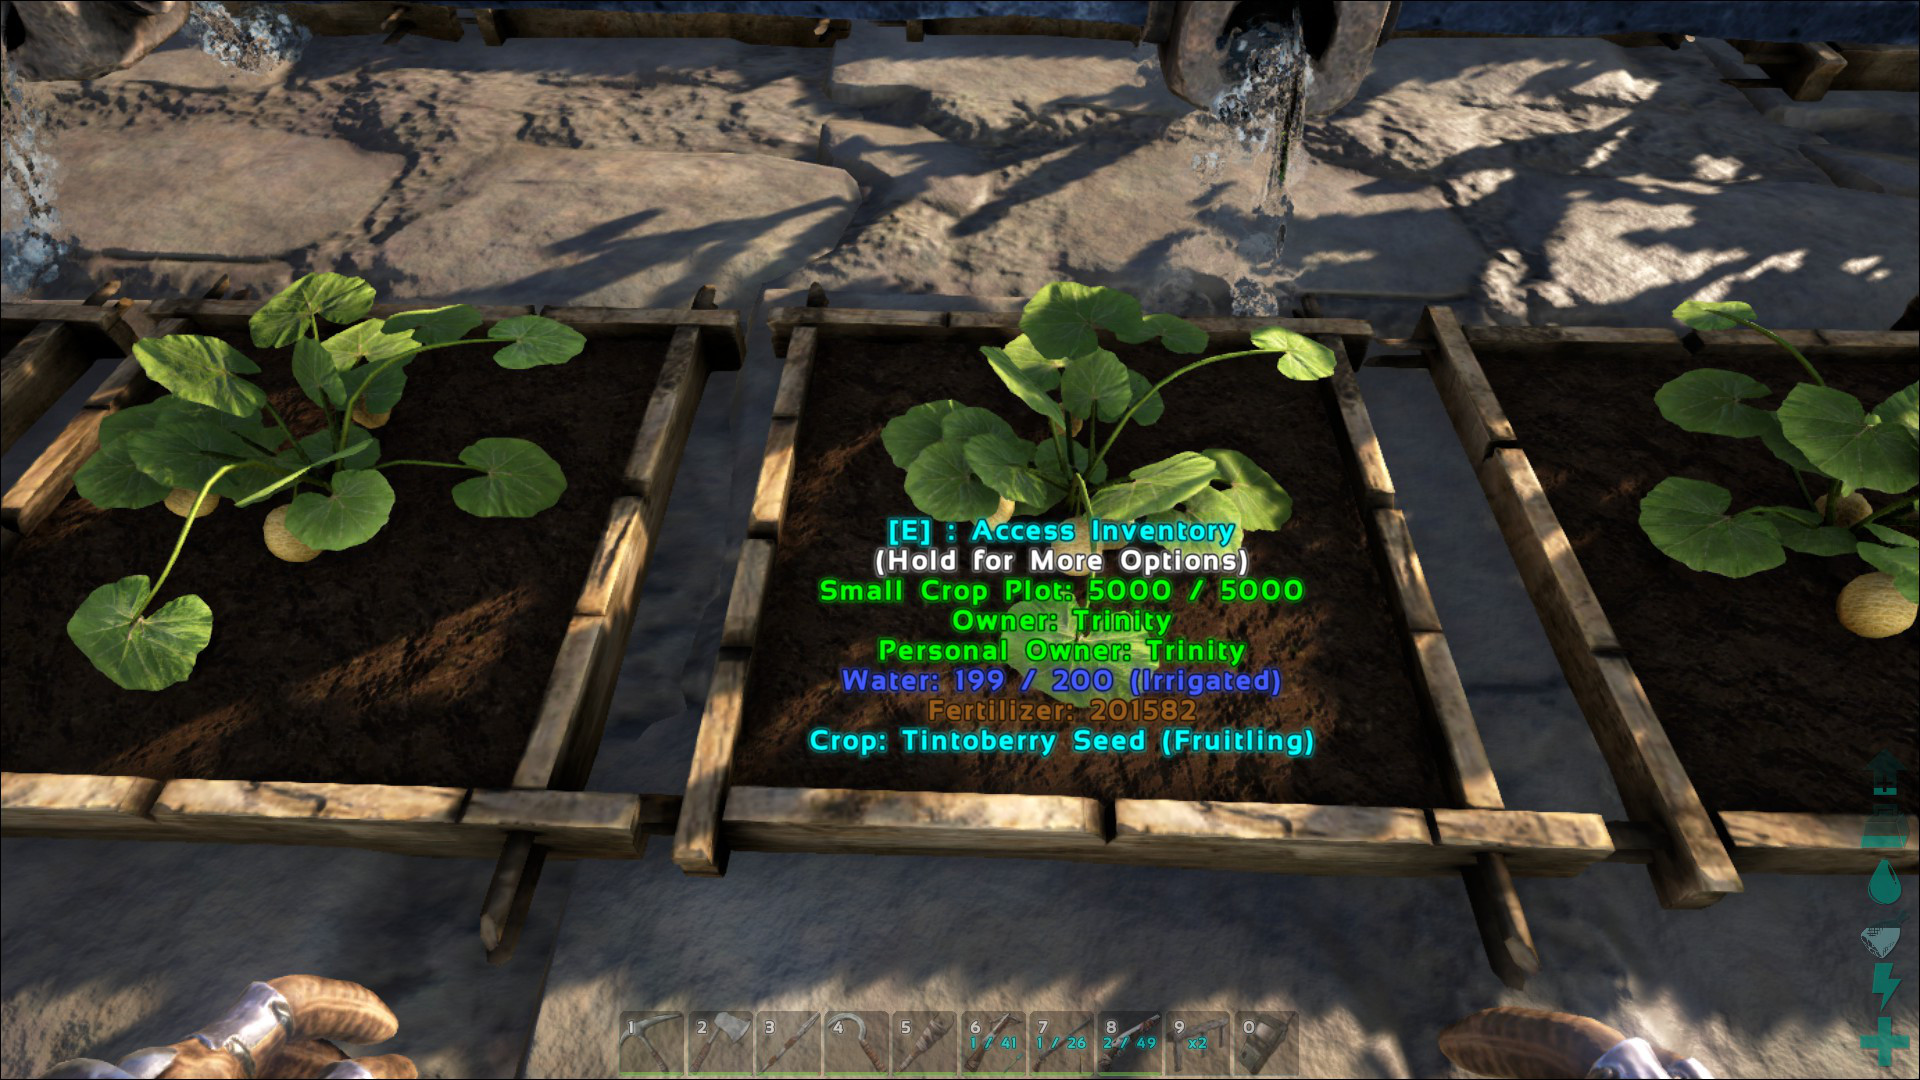 Tintoberries can be grown in any size Crop Plot in Ark. This image shows the Tintoberry growing in a Small Crop Plot.